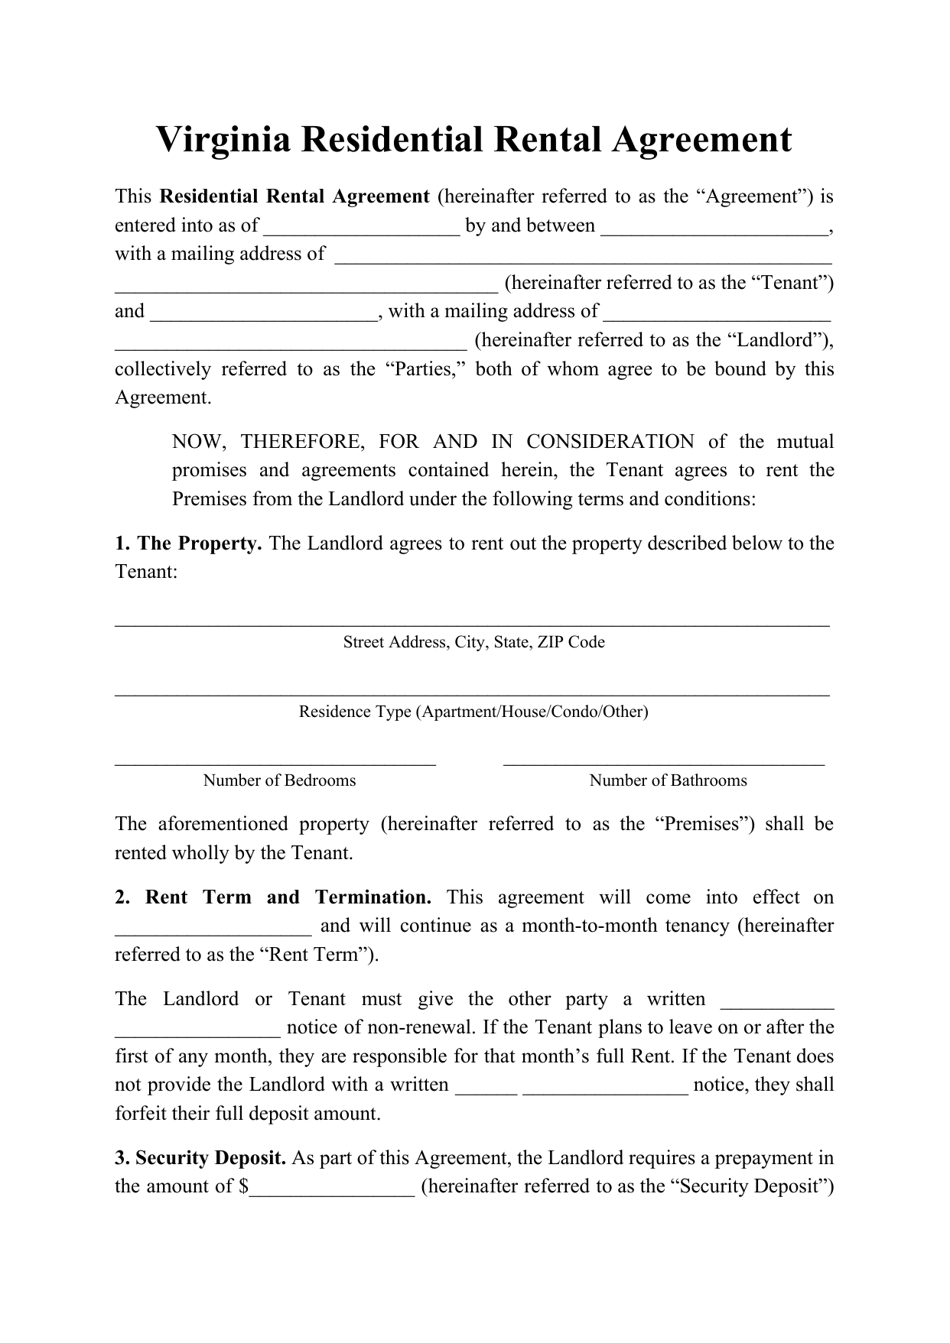 Residential Rental Agreement Template - Virginia, Page 1